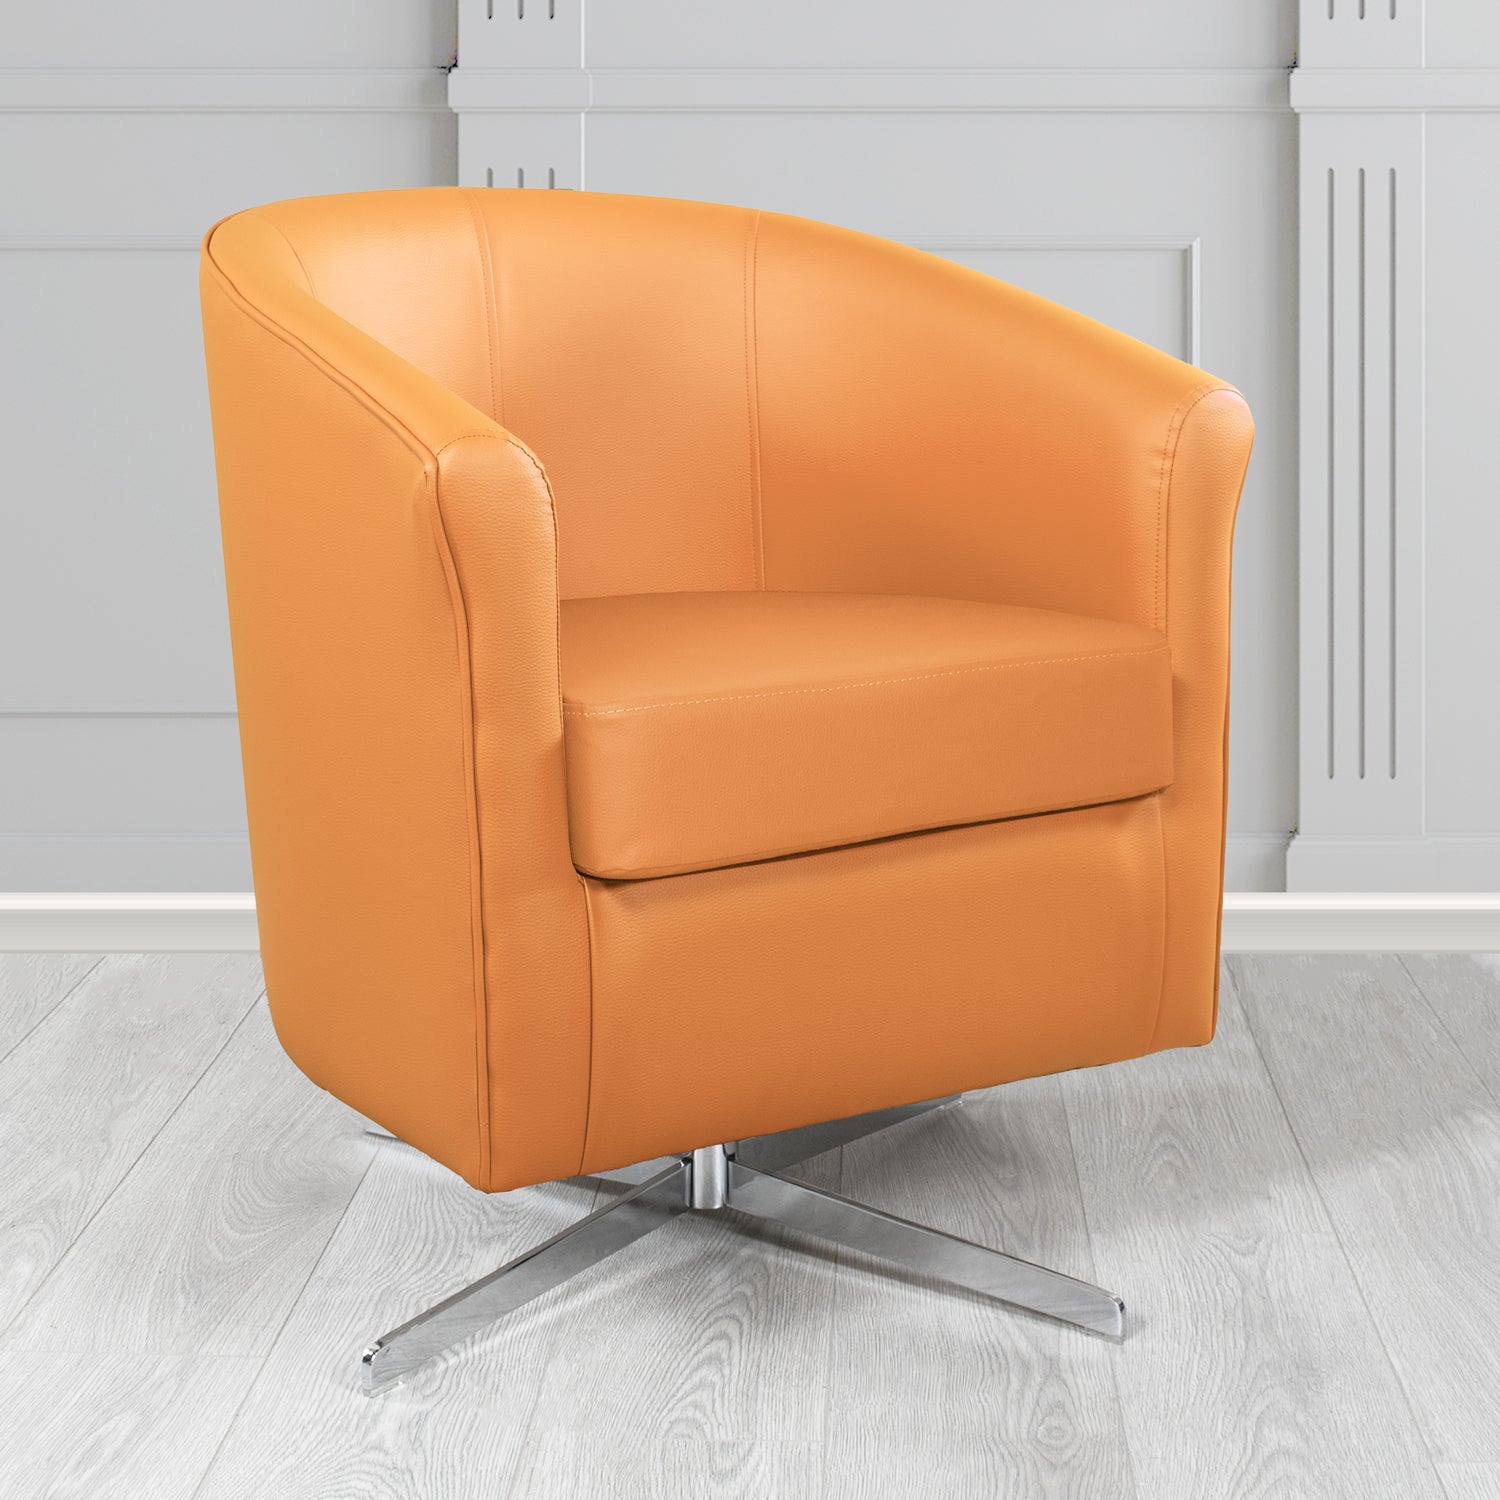 Cannes Swivel Tub Chair in Just Colour Tangerine Crib 5 Faux Leather - The Tub Chair Shop